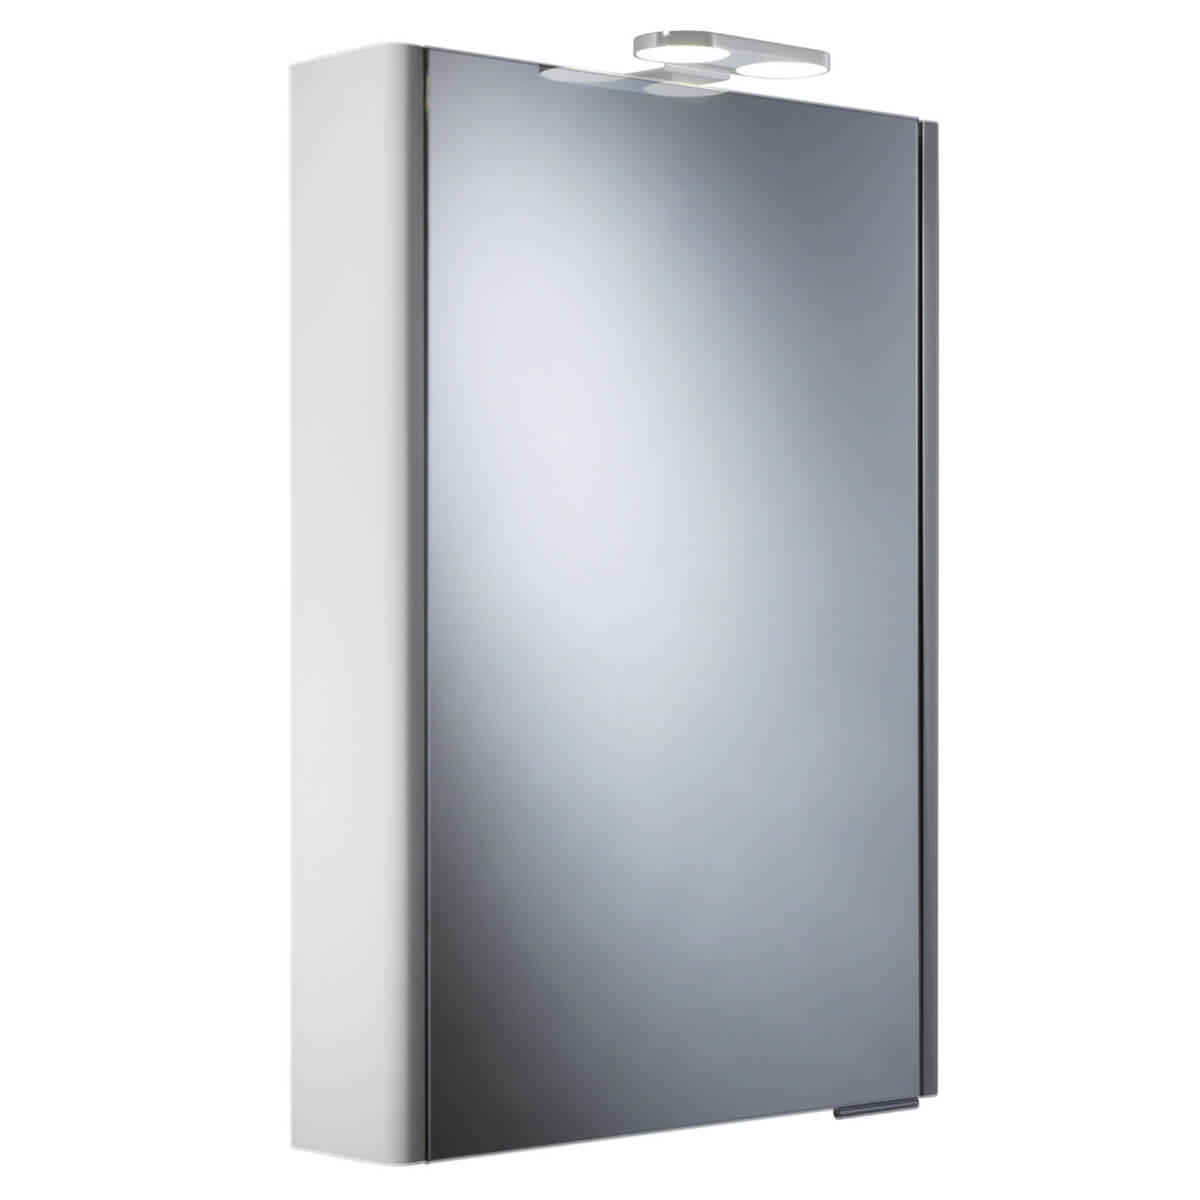 Roper Rhodes Phase Single Mirror Glass Door Cabinet With Leds Dn50wl